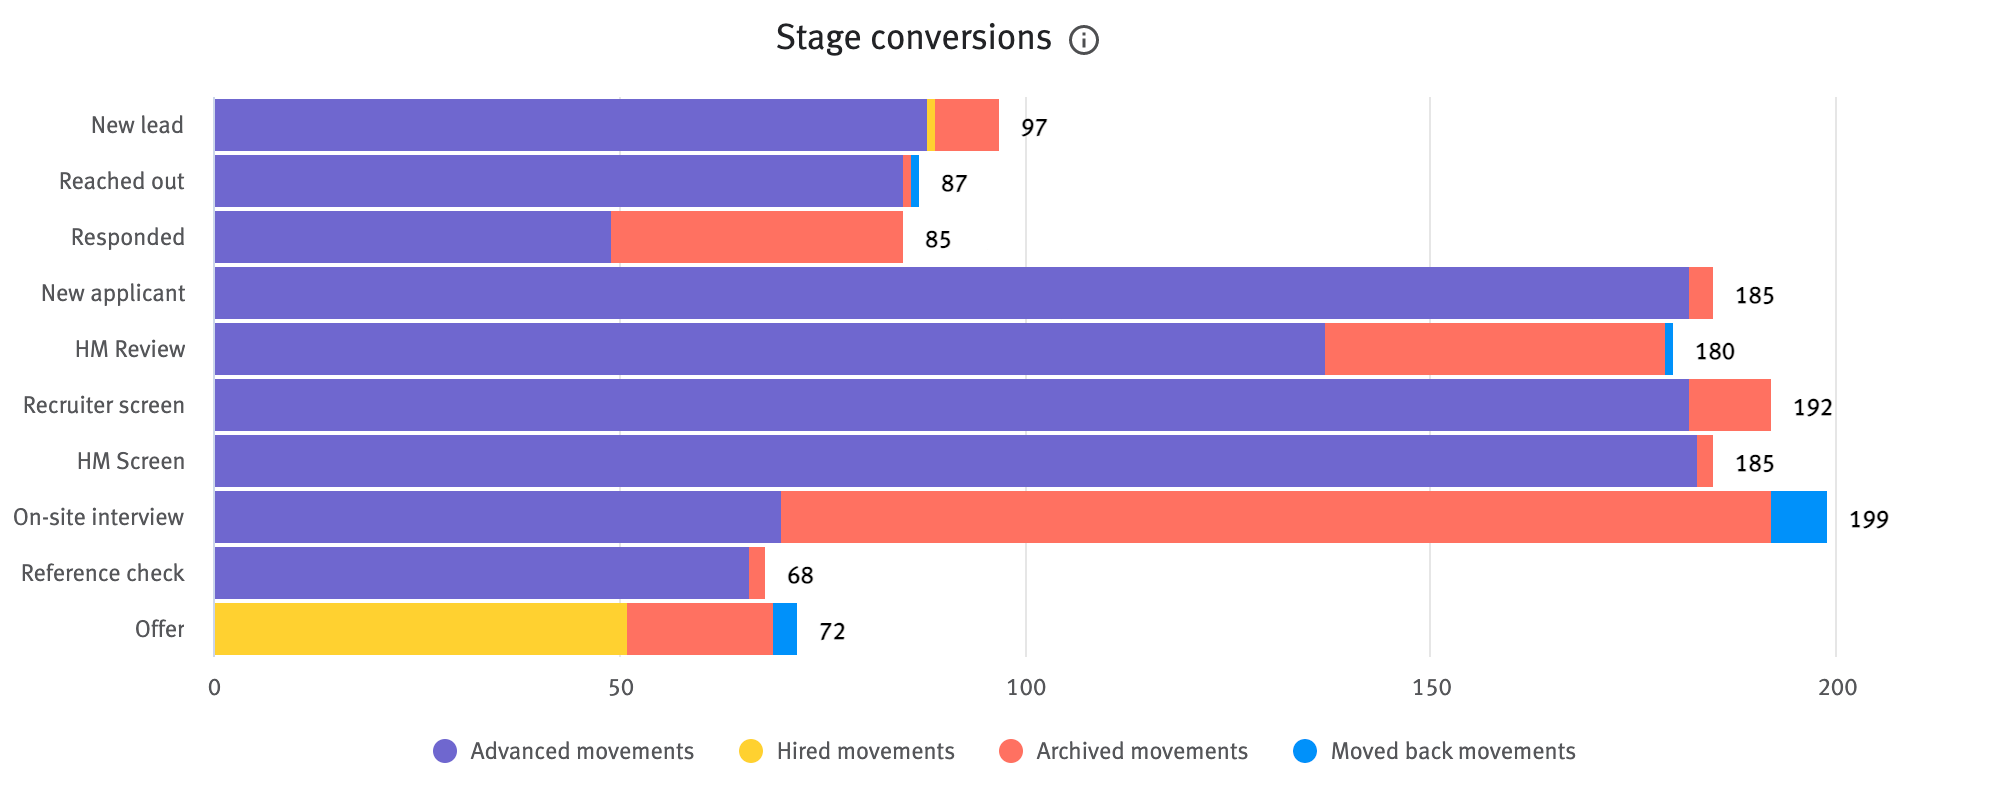 Stage conversions chart